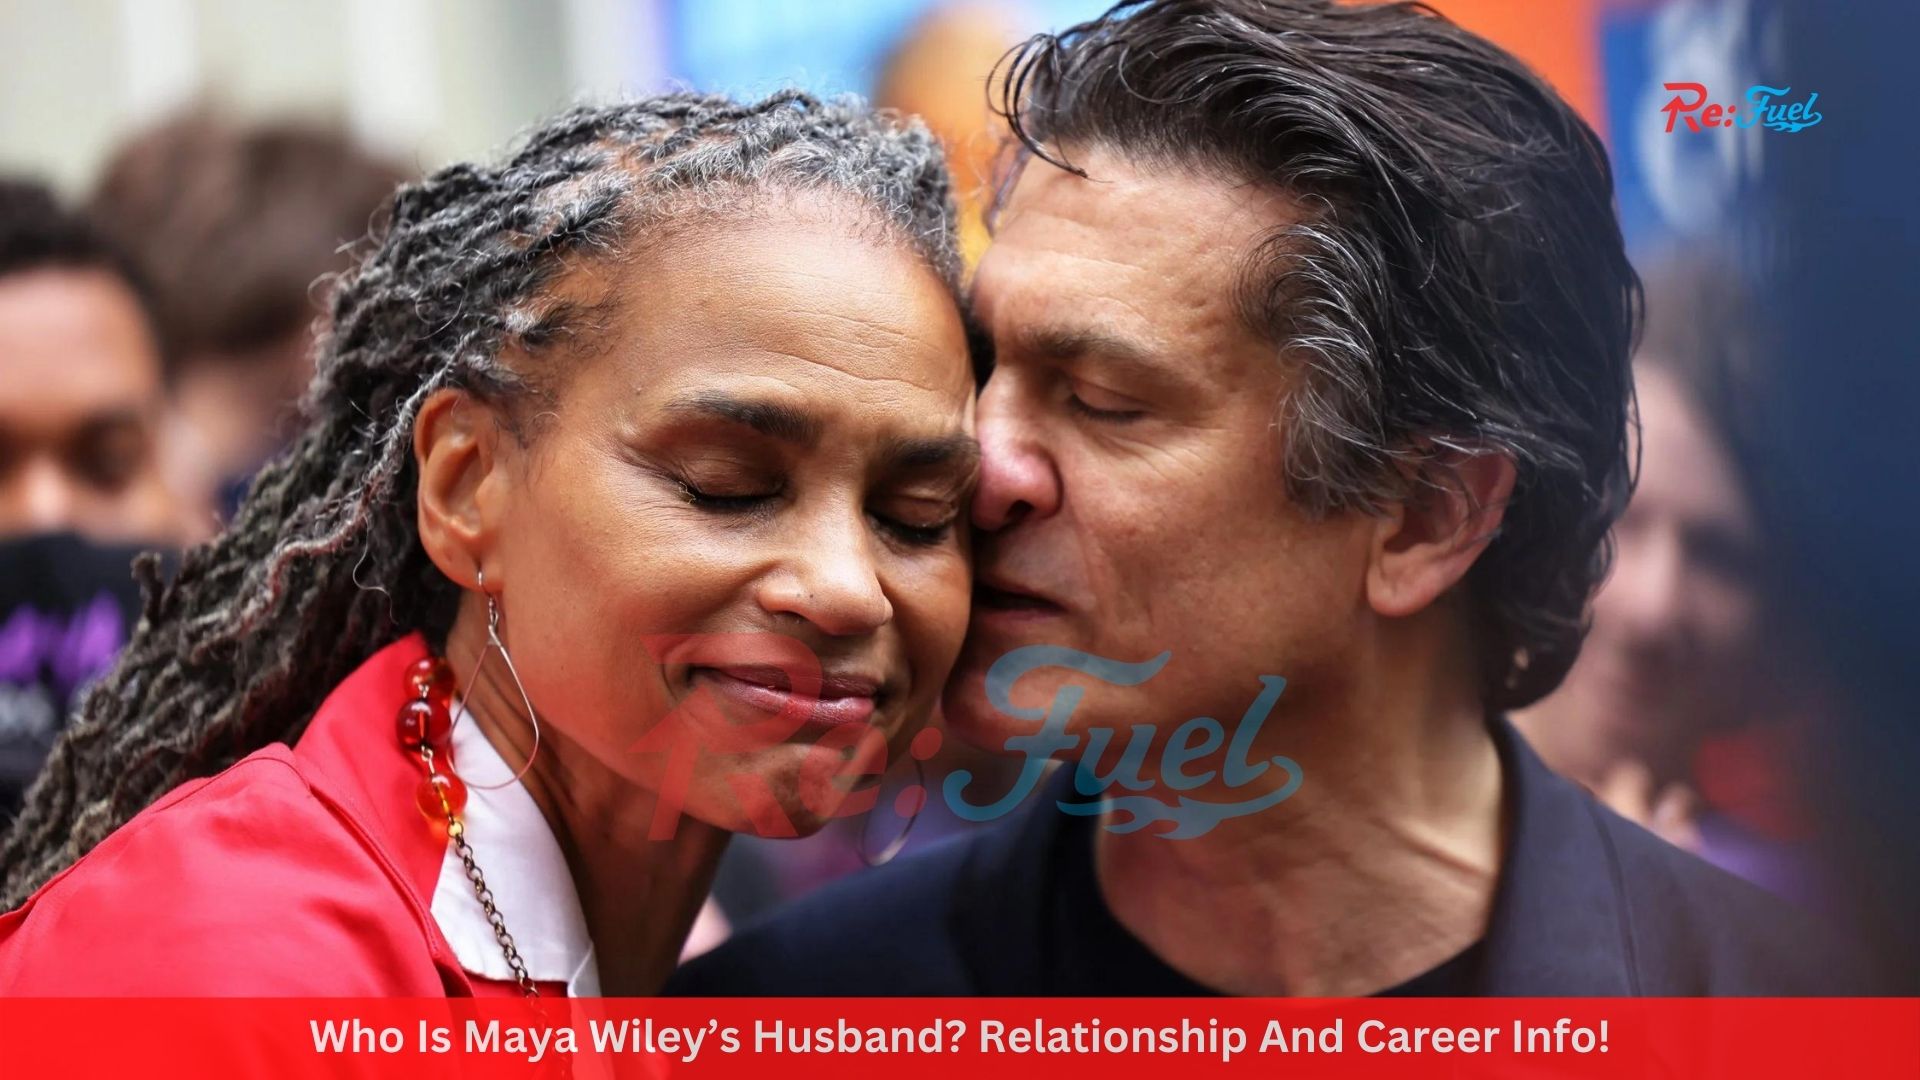 Who Is Maya Wiley’s Husband? Relationship And Career Info!